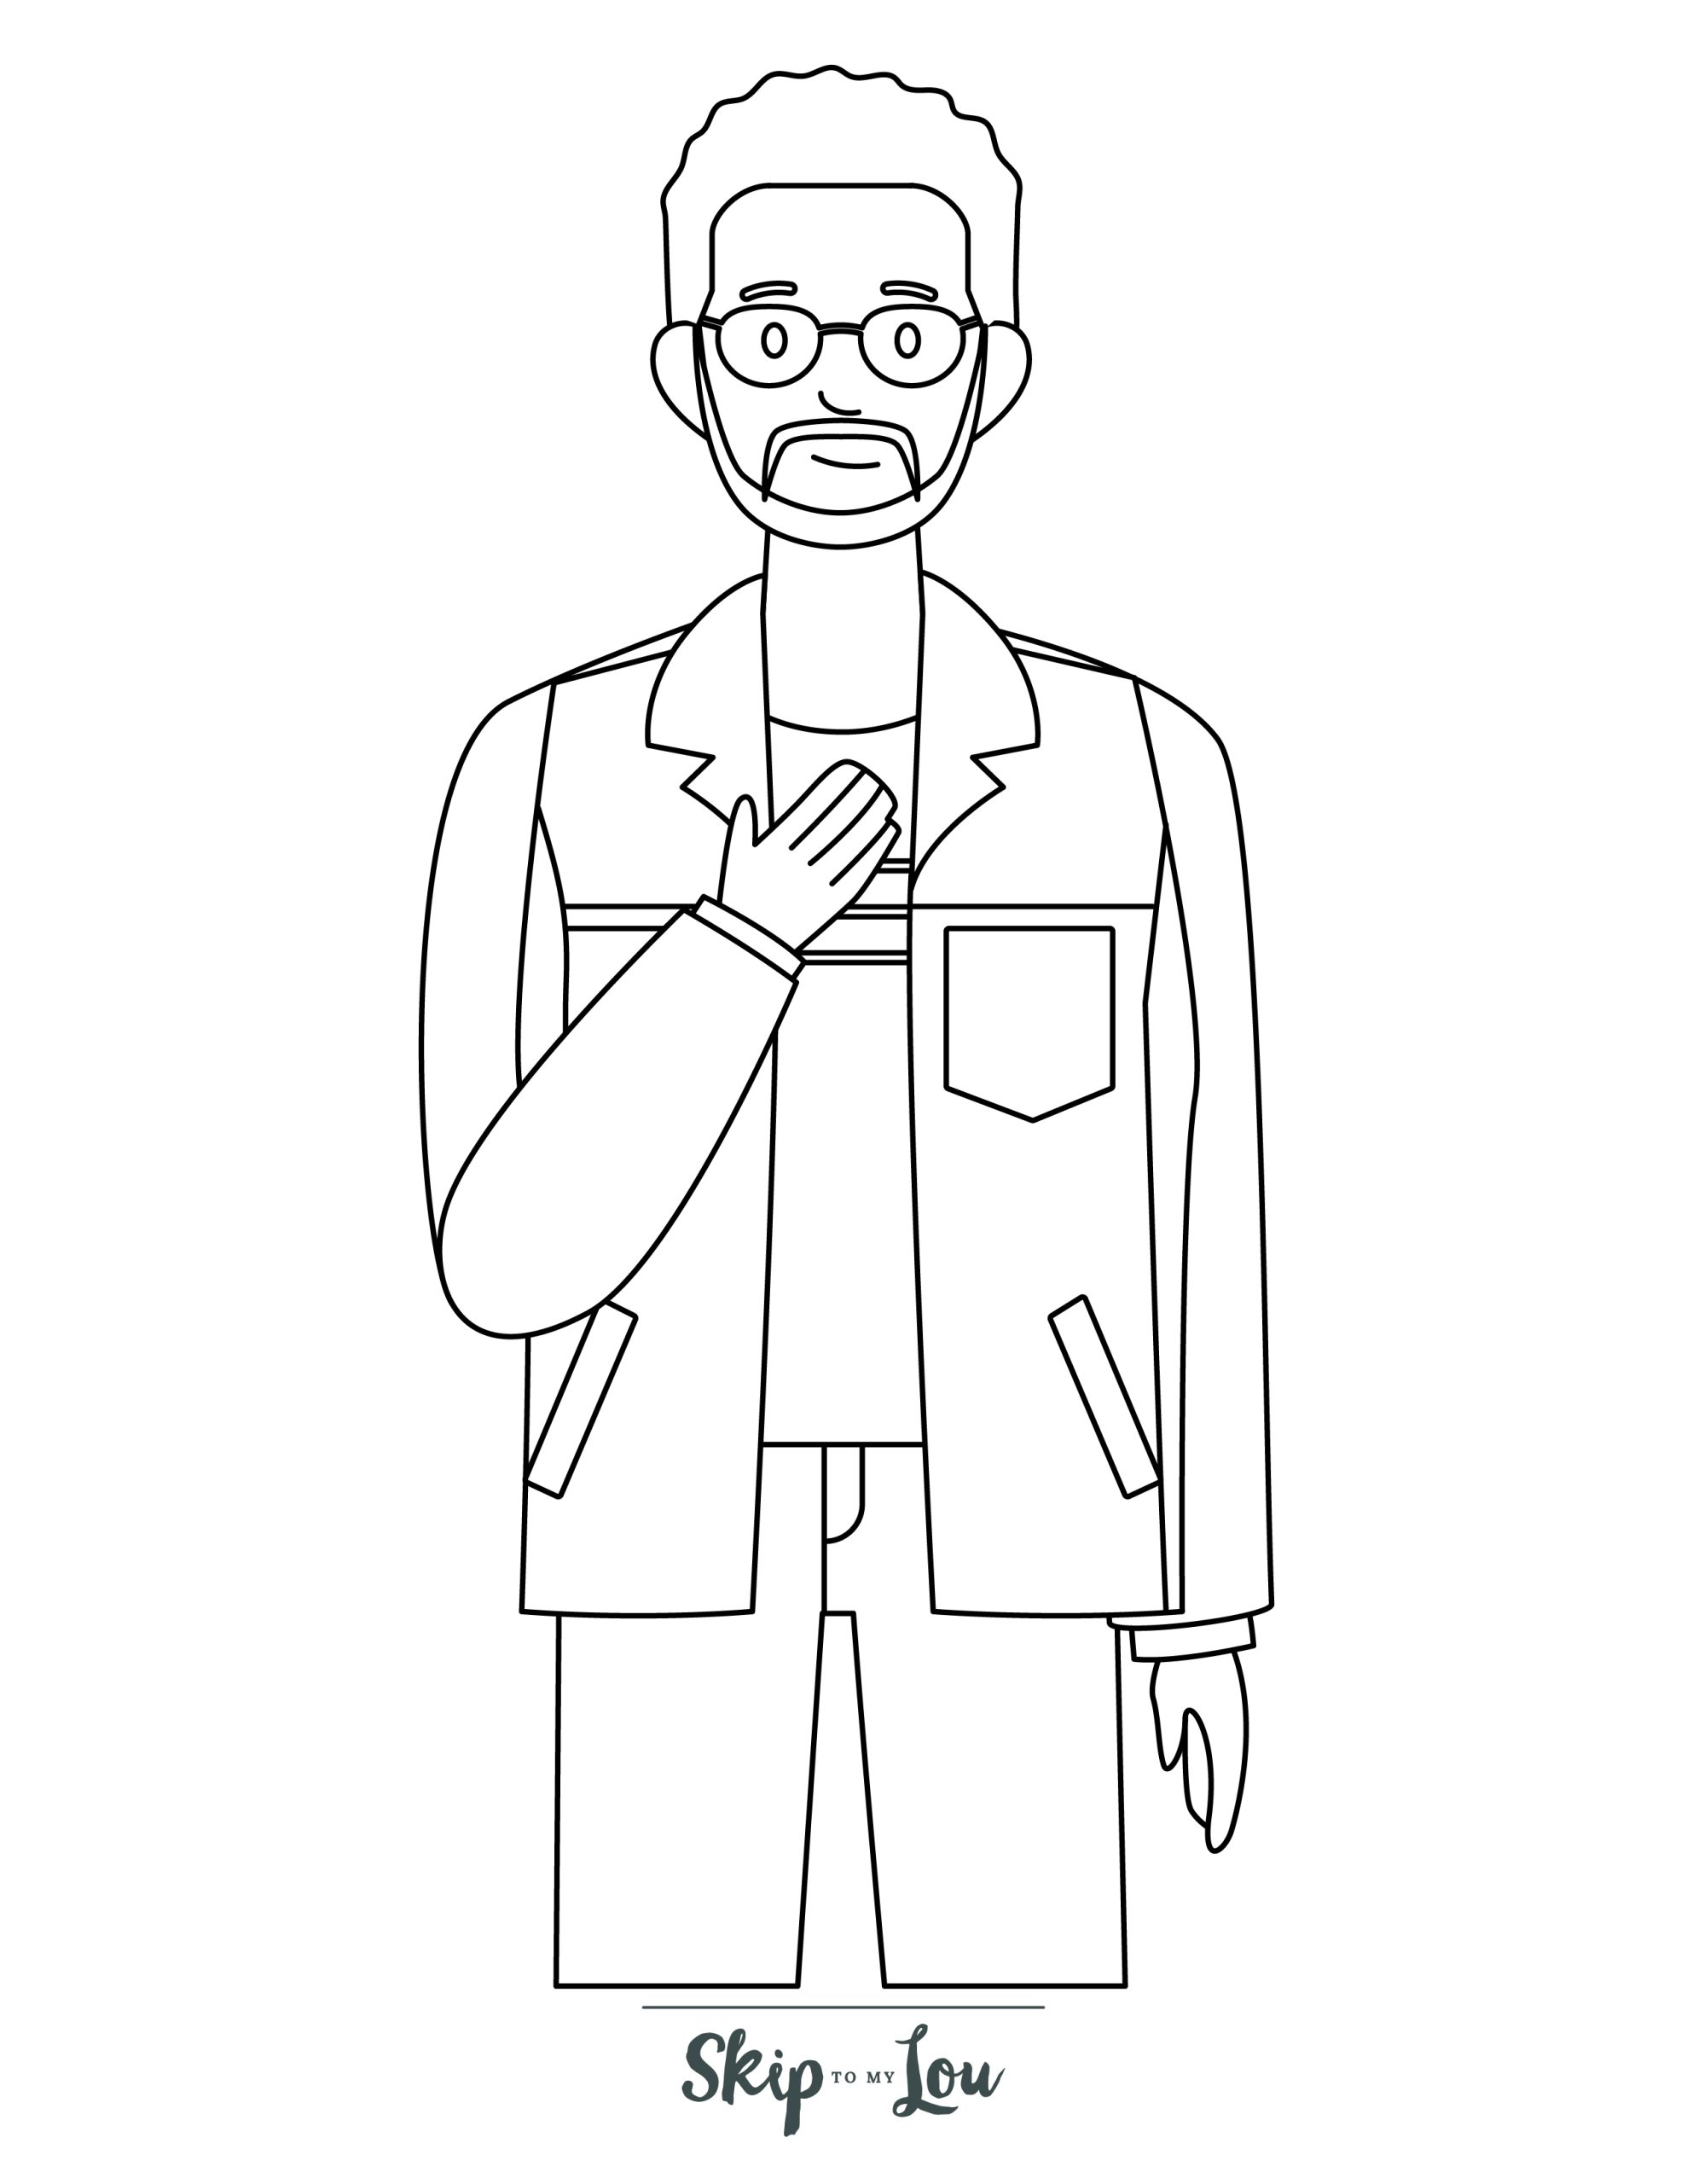 People Coloring Page 12 - Line drawing of smart man standing